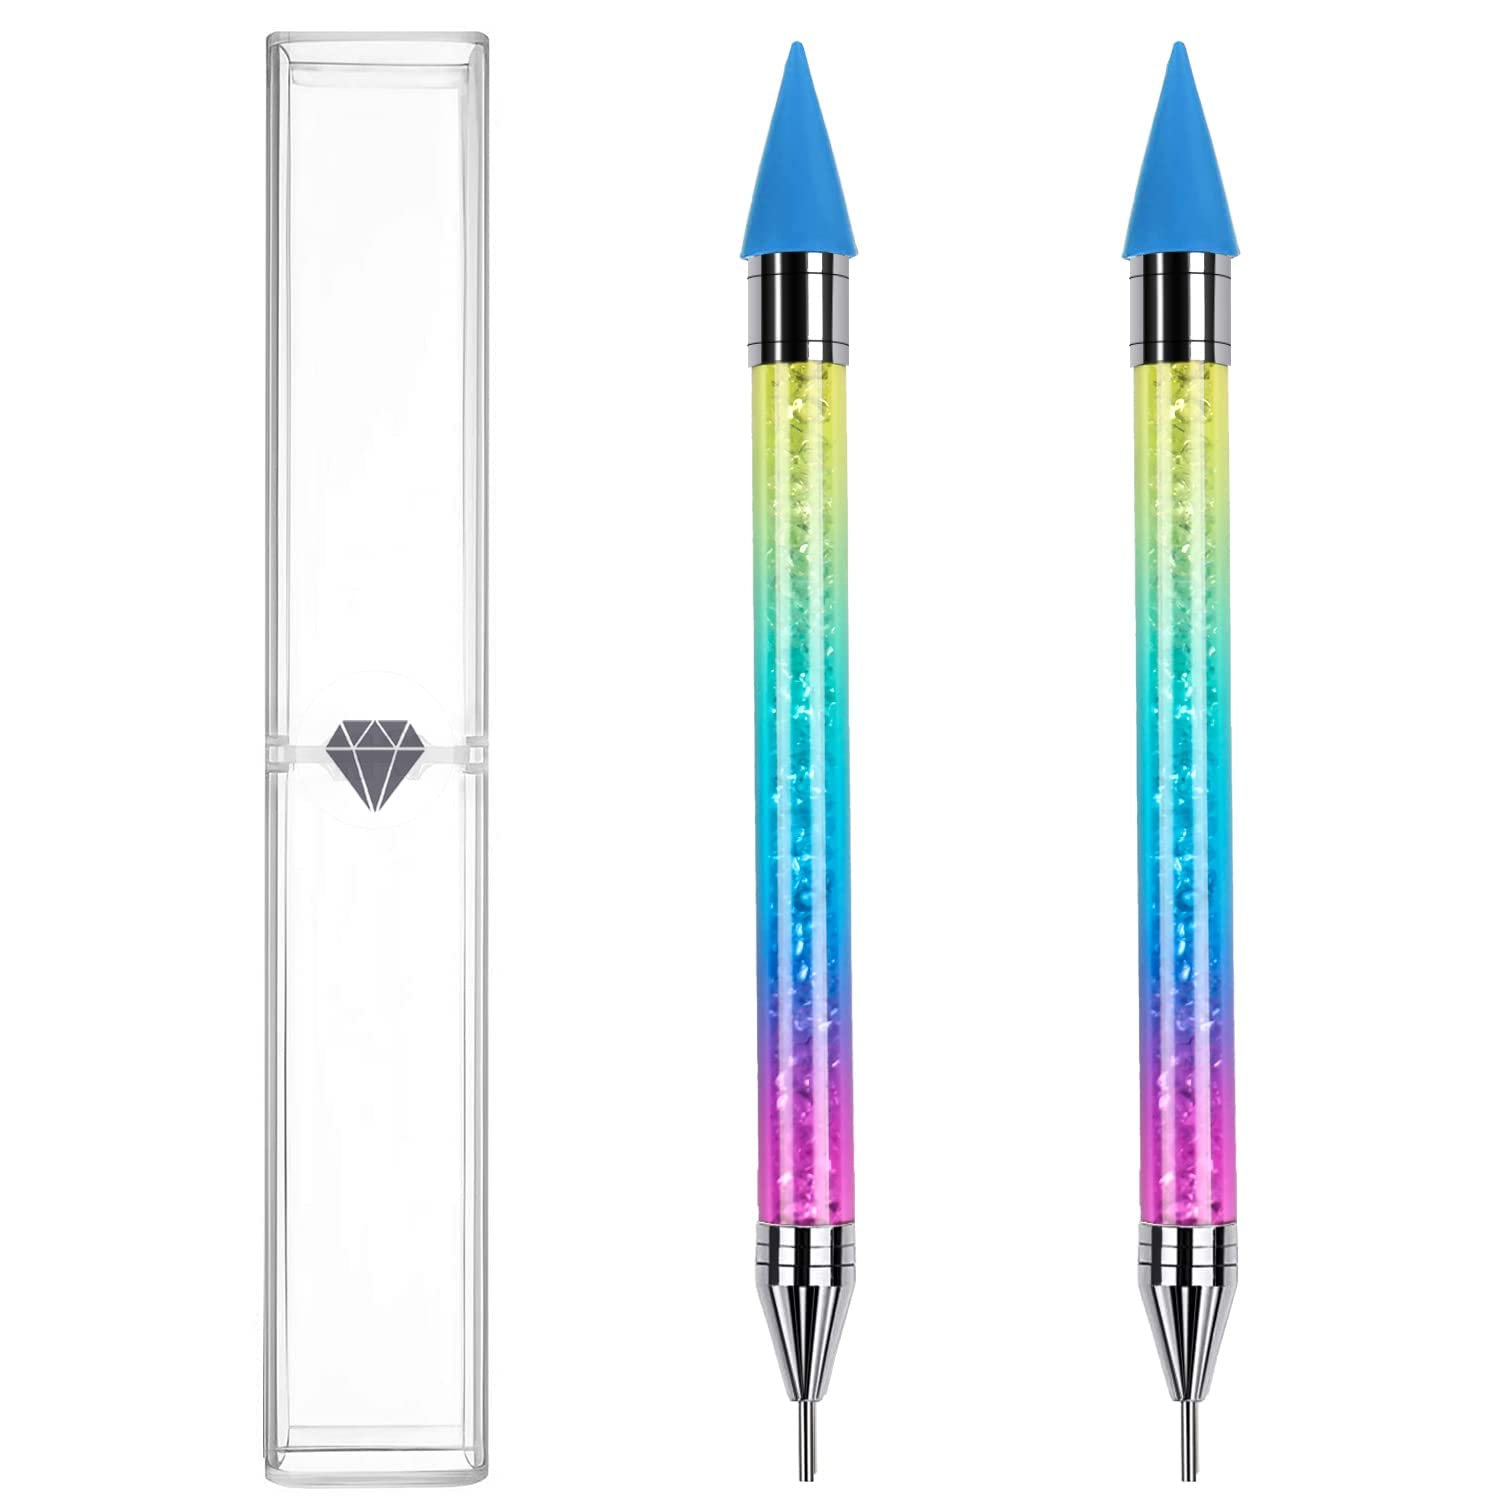 Shop Nail Rhinestone Wax Pen with great discounts and prices